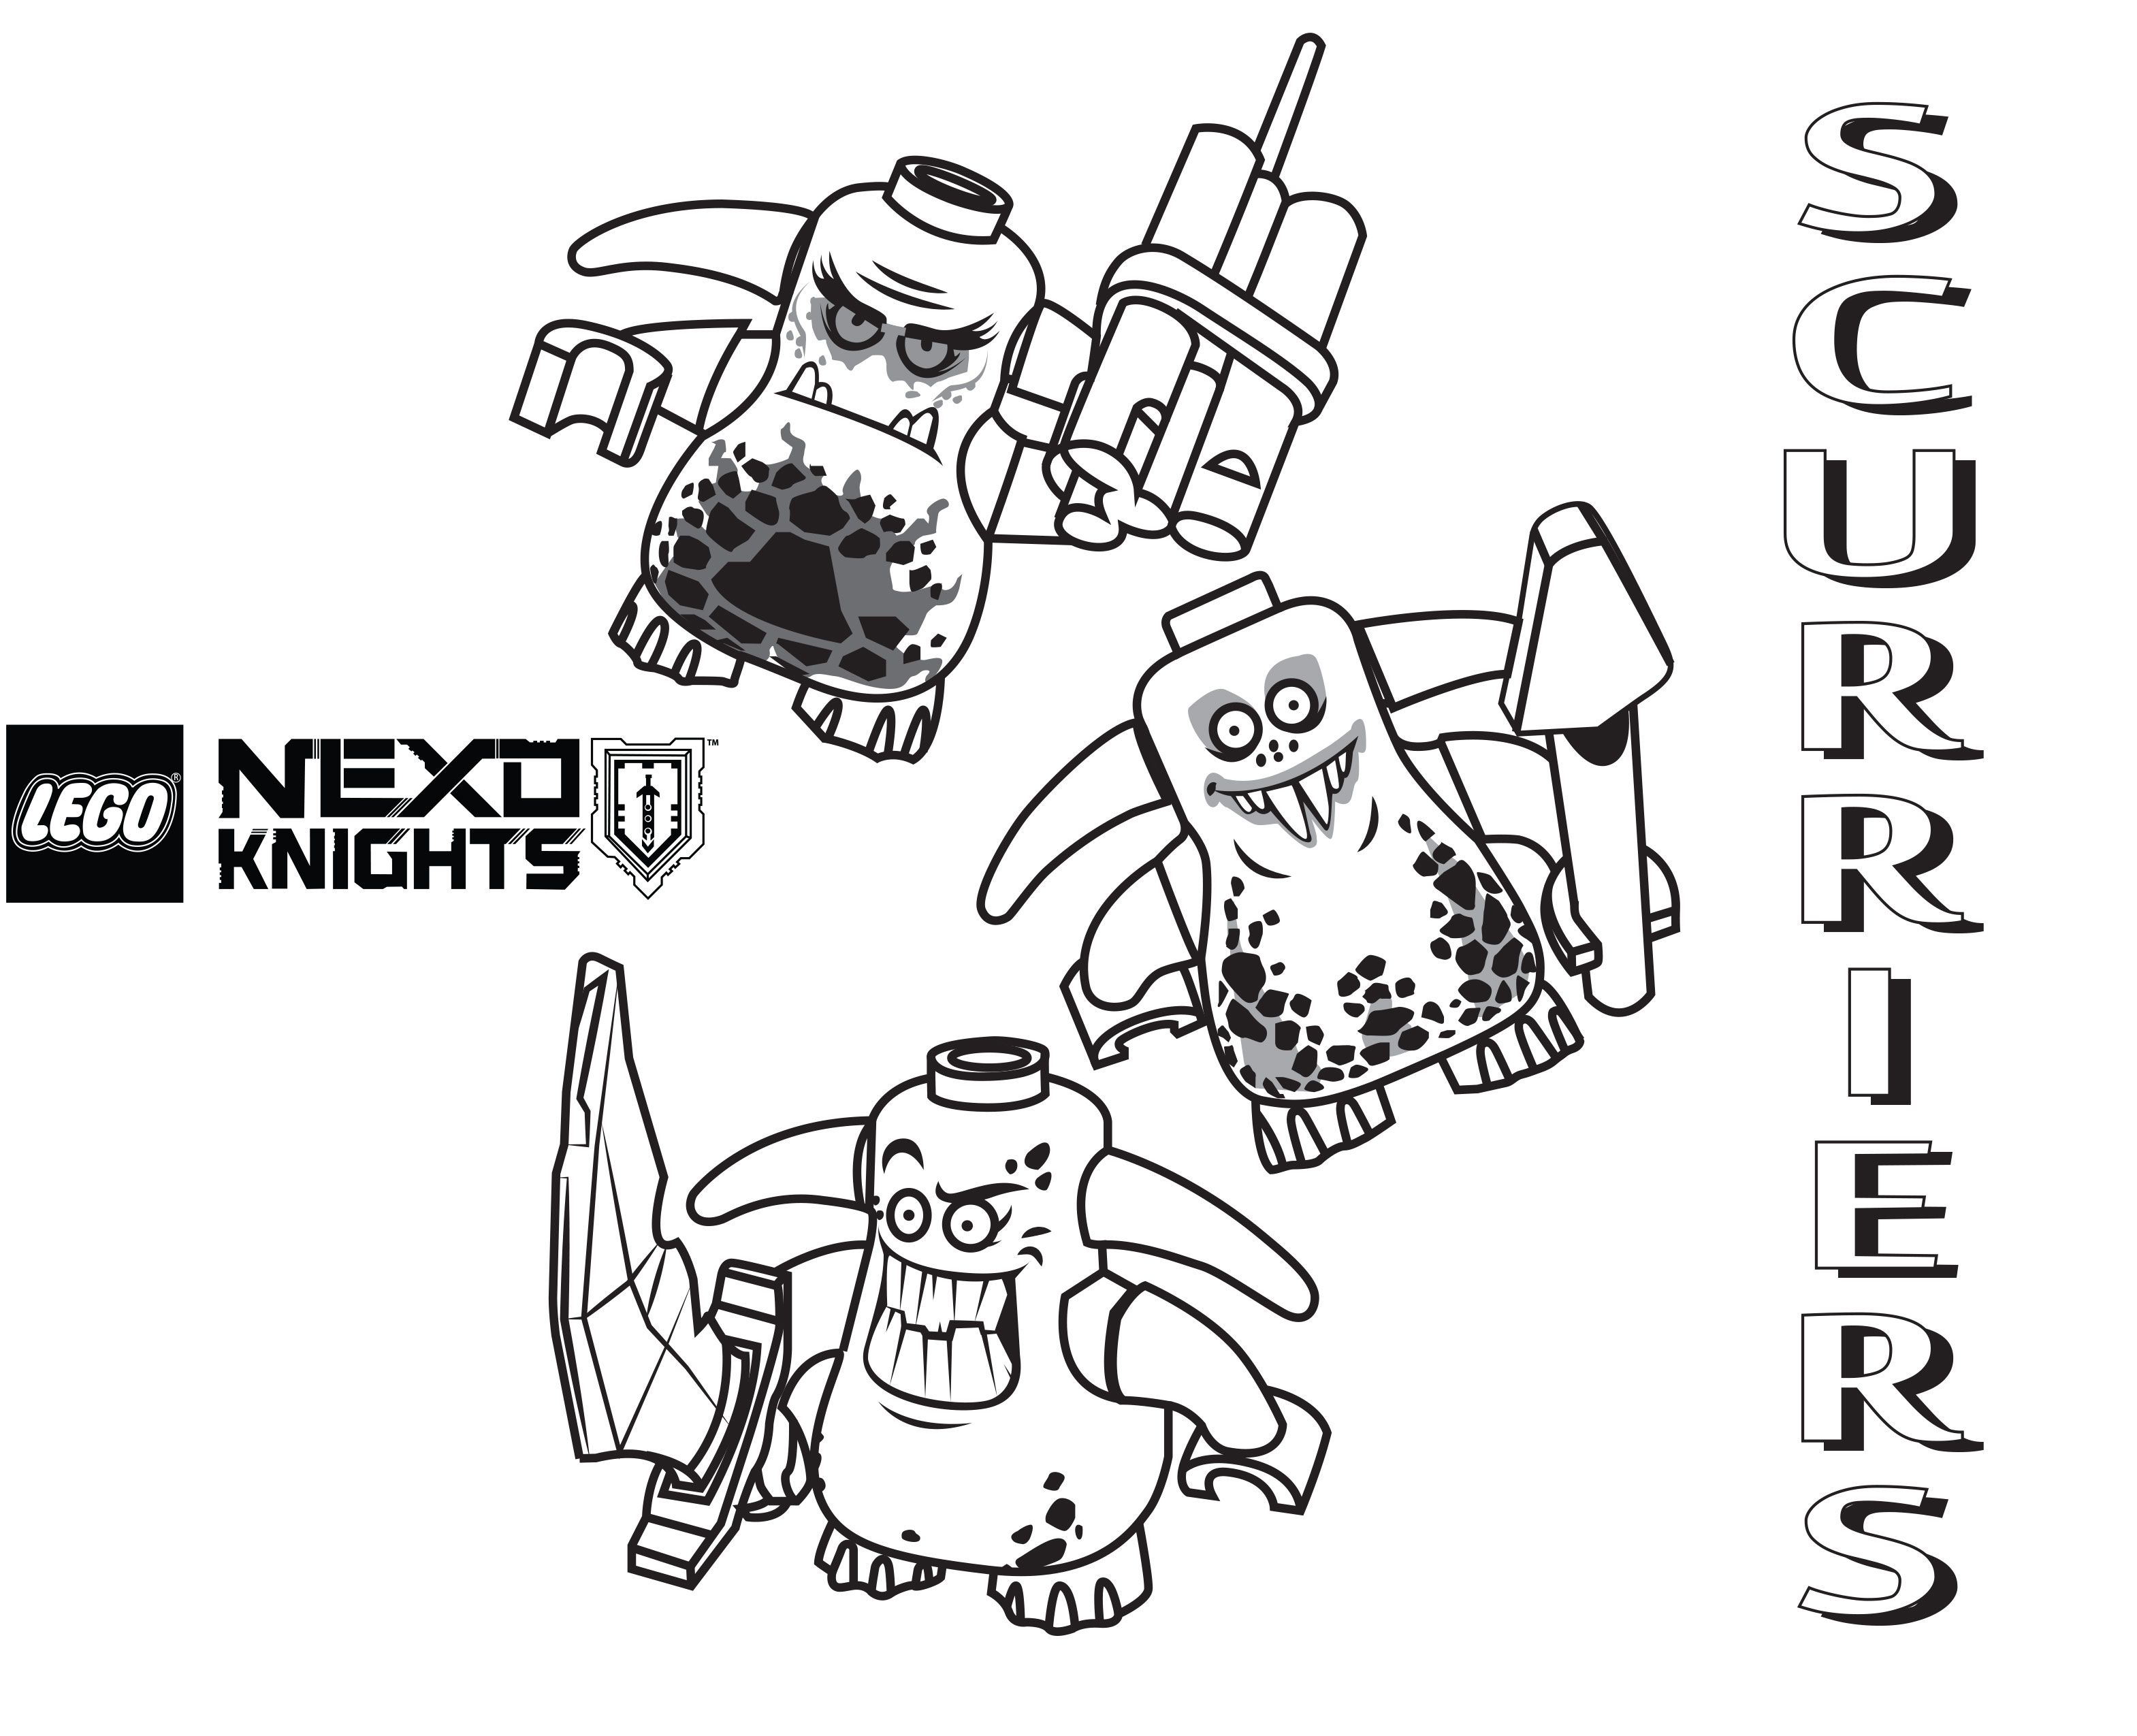 Nexo Lego Knights Coloring Pages | Color Pages | Pinterest | Lego - Free Printable Pictures Of Knights